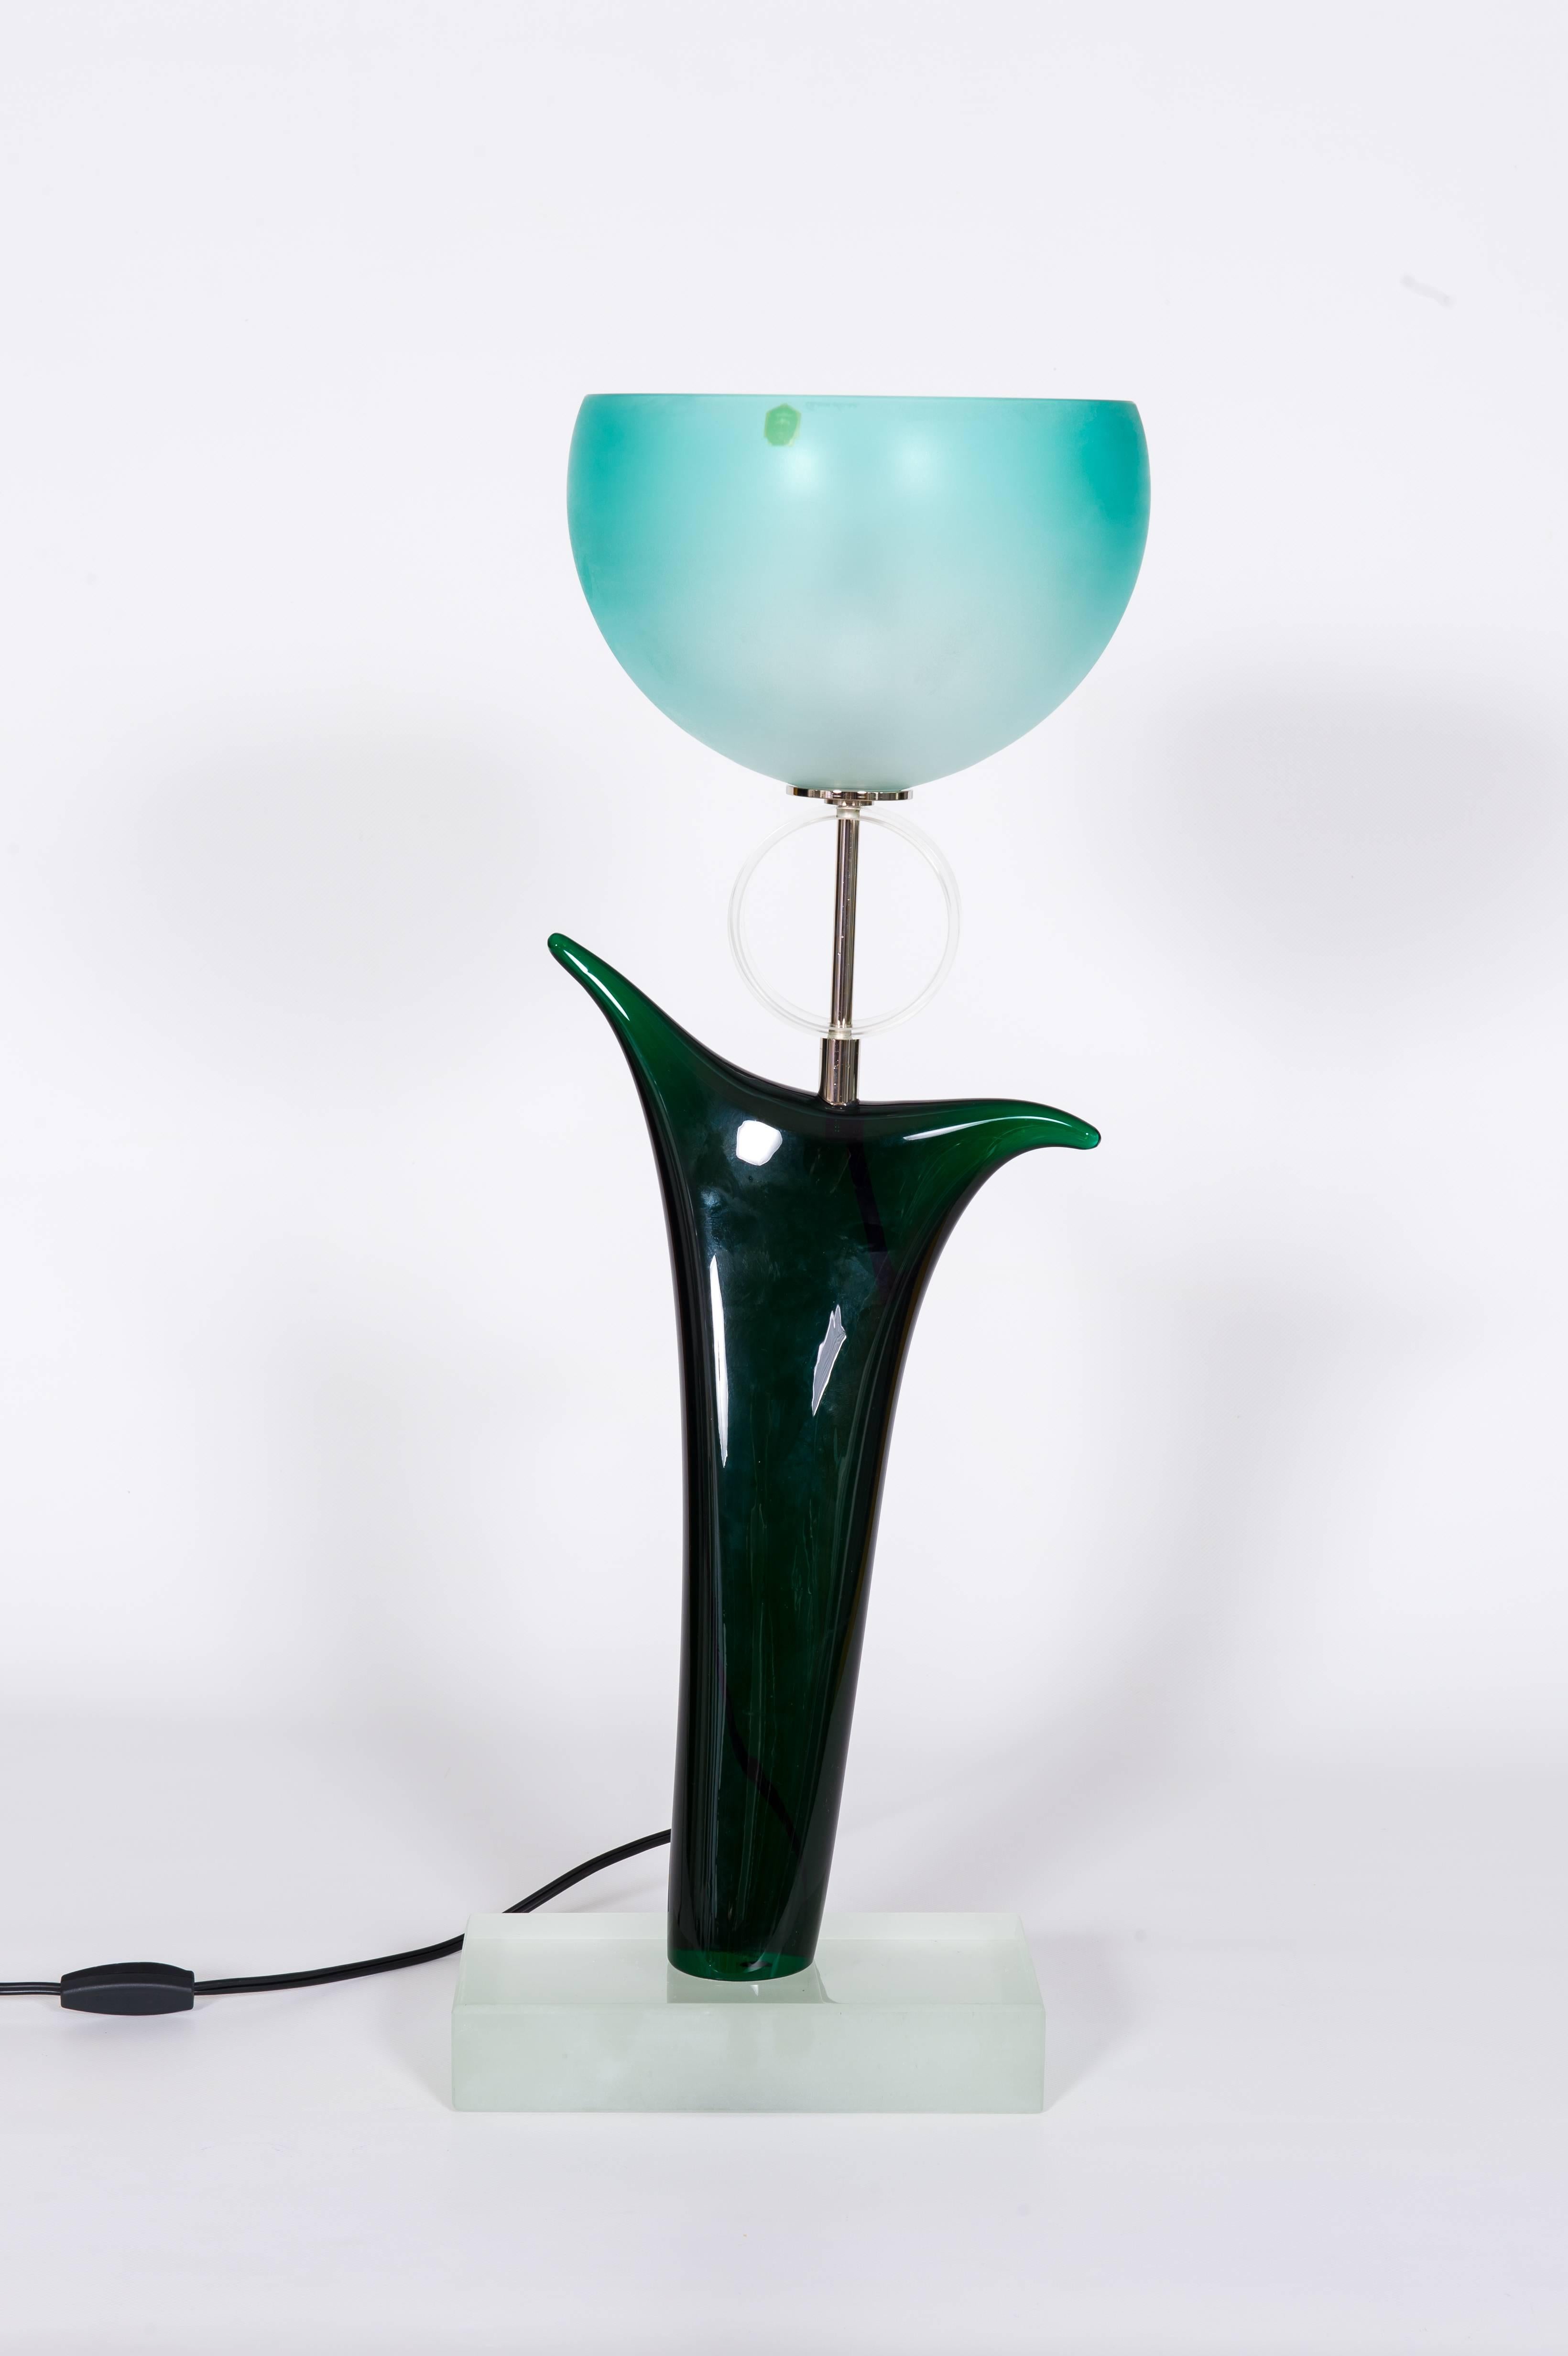 Original Cenedese Tulip Table Lamp in green and blue Murano Glass Italy, 1970s.
Entirely handmade in the 1970s in Murano, this design table lamp is an authentic creation of the famous Venetian glassblower Cenedese, as documented from the signature